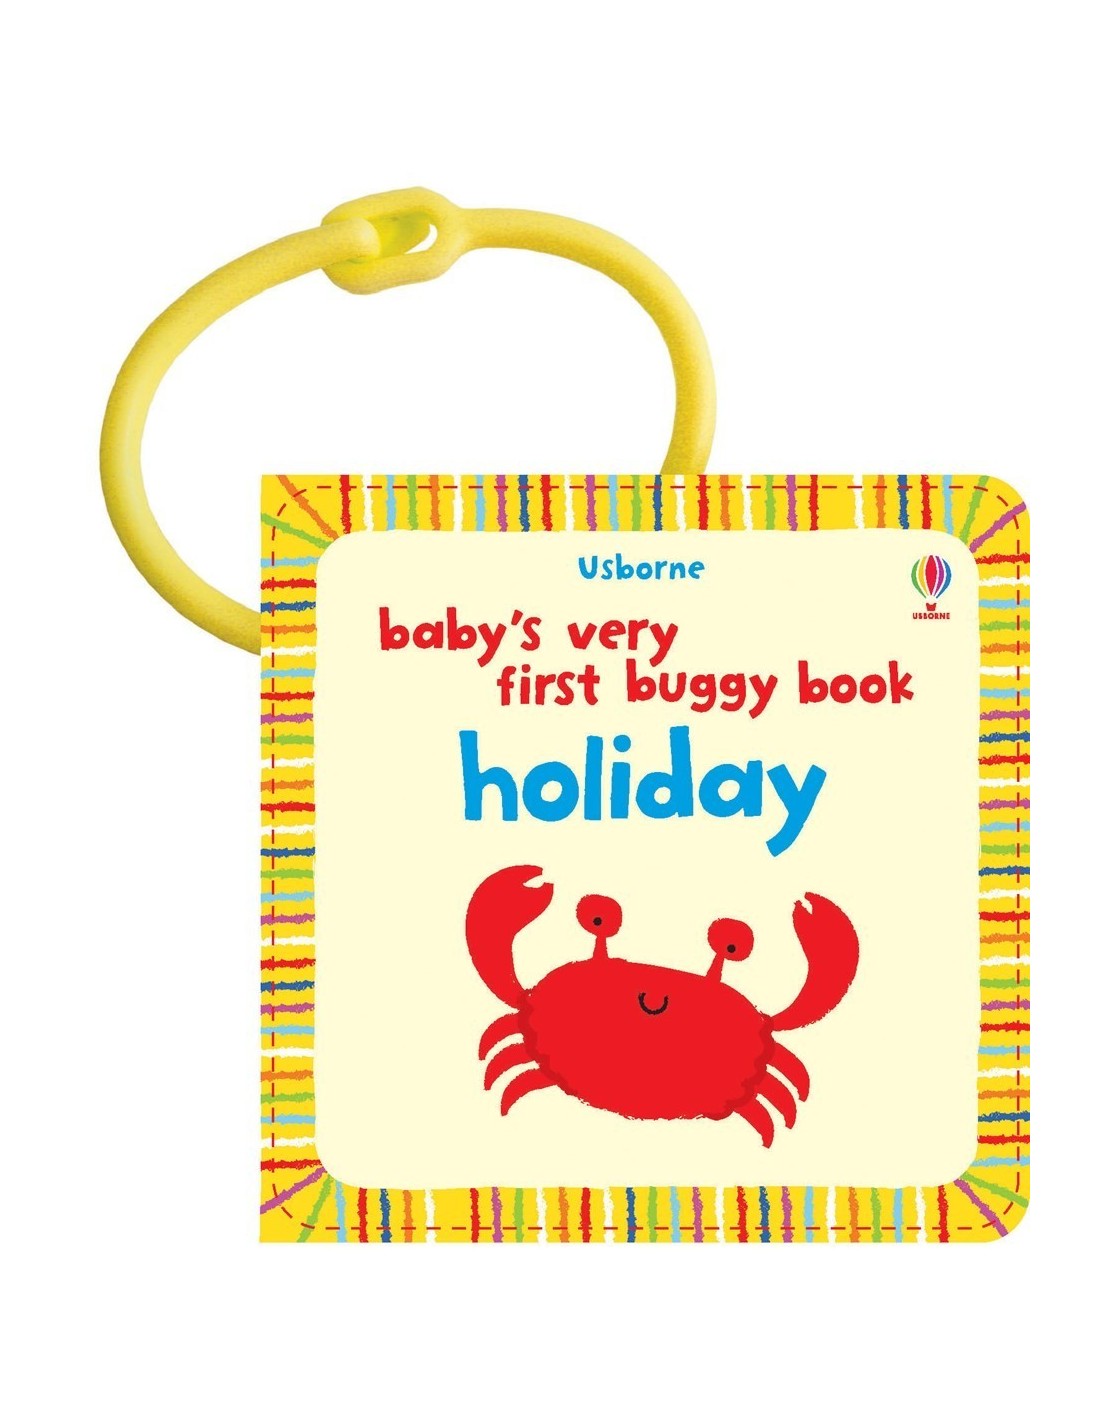 Holiday buggy book